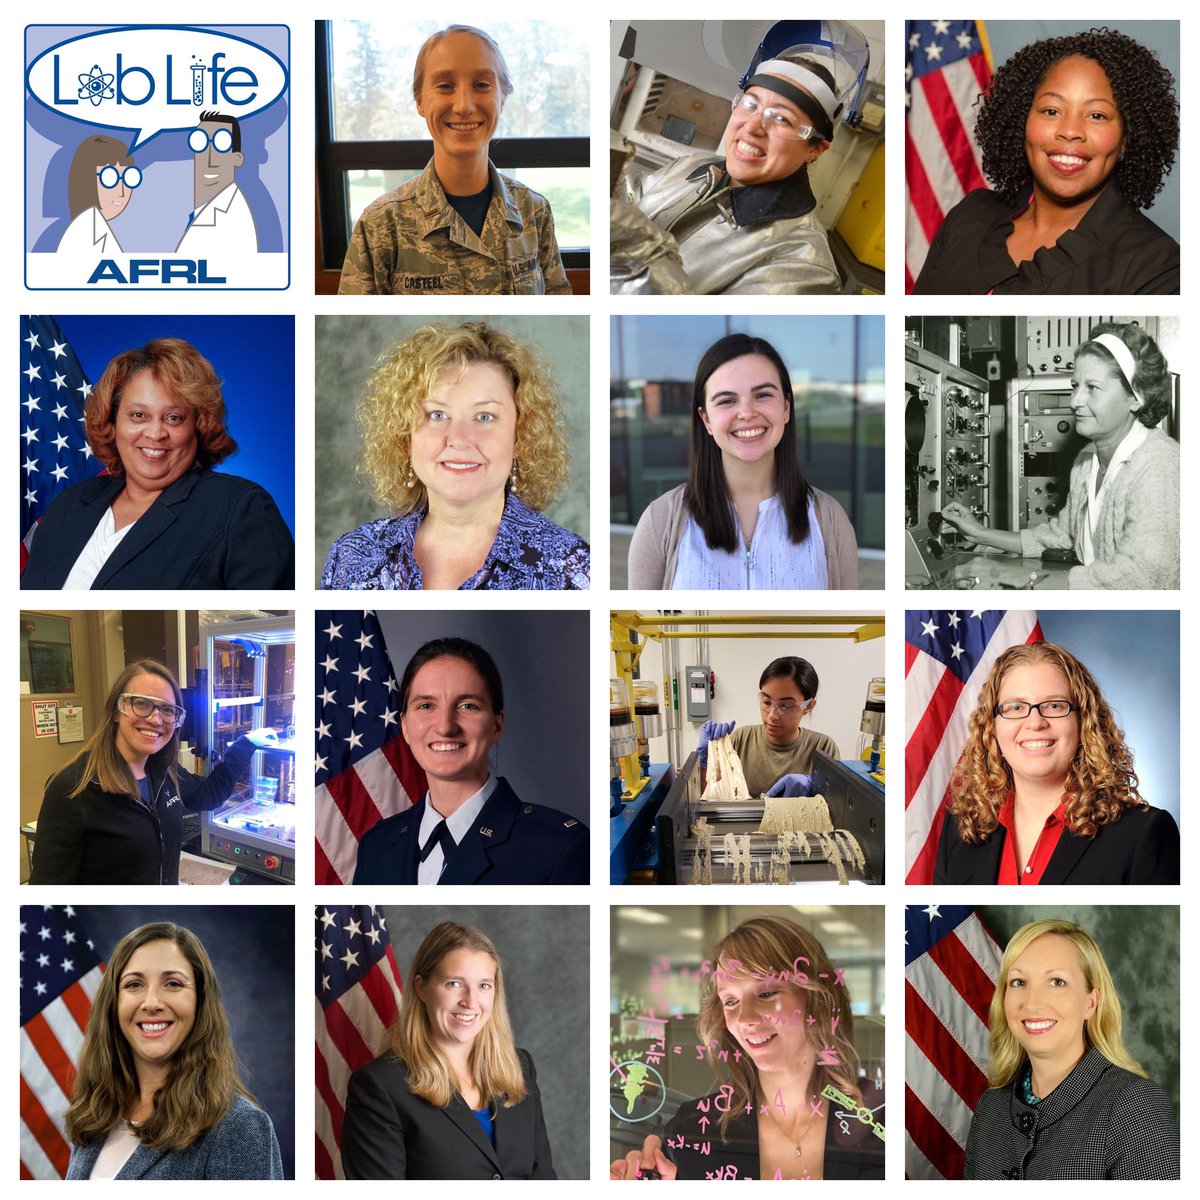 Shout-out to our past and present team members who have helped #ShapeTheWorld on this International Women in Engineering Day! #INWED20